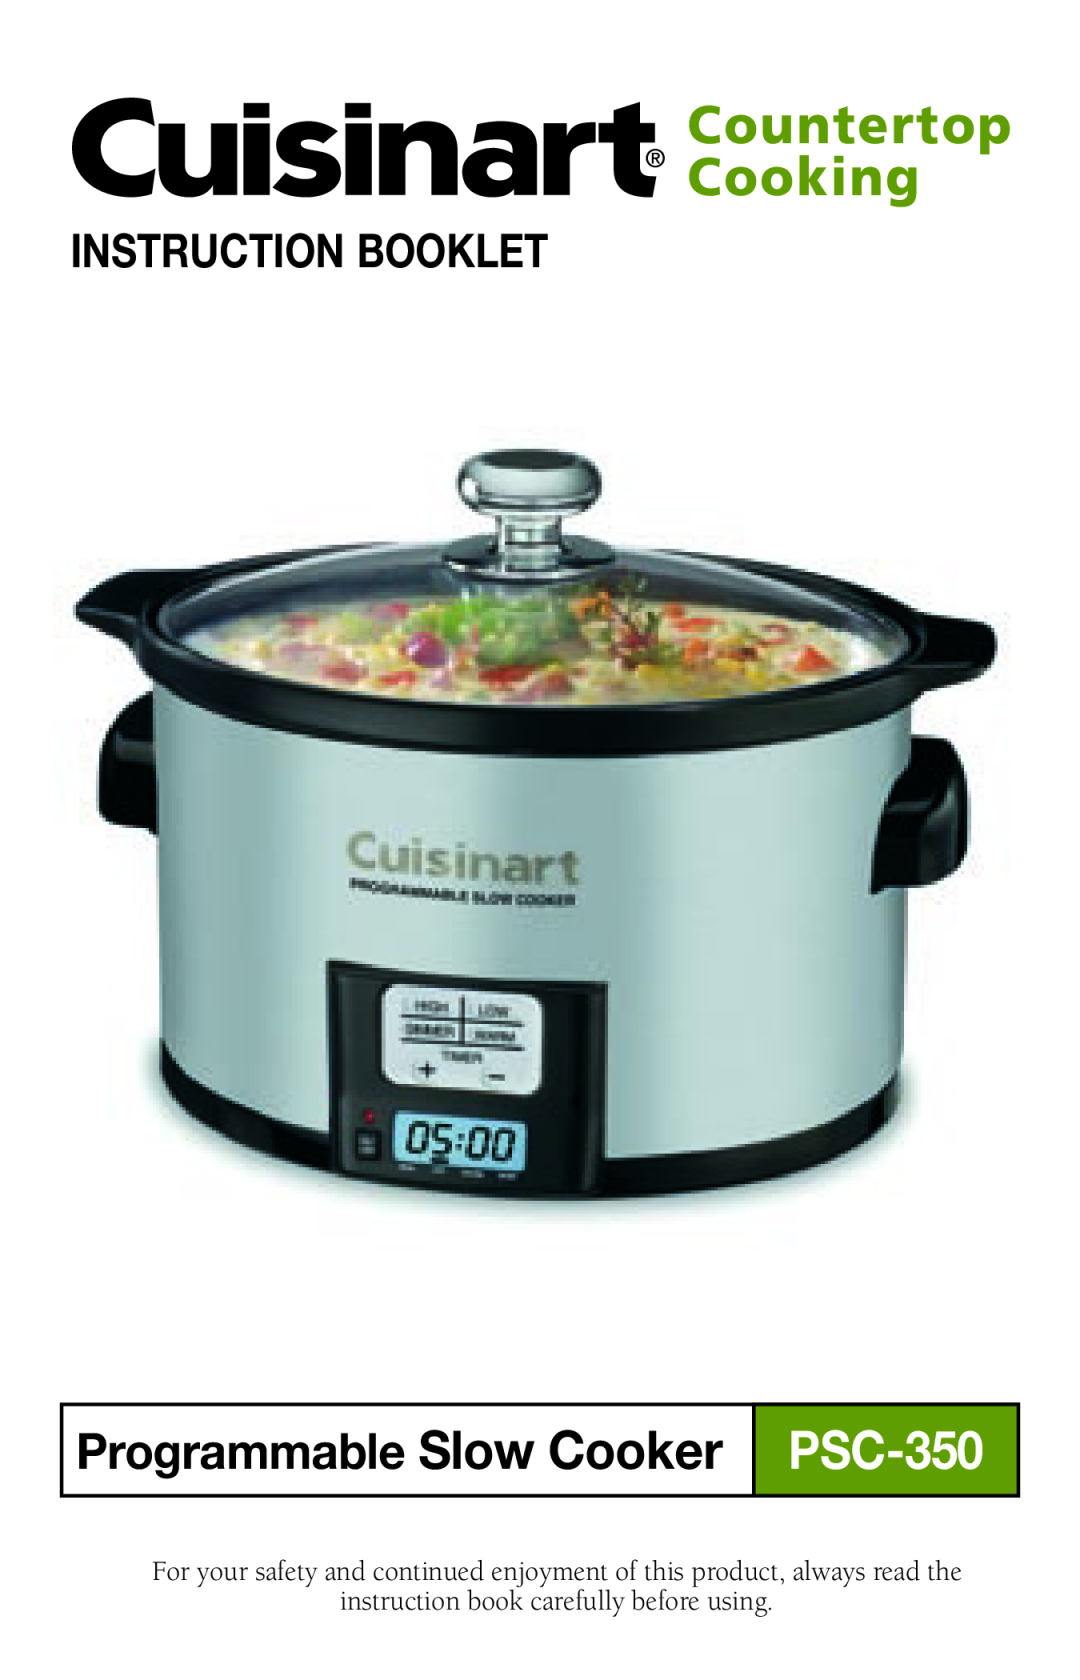 Cuisinart PSC-350 manual Instruction Booklet, Countertop Cooking, Programmable Slow Cooker 